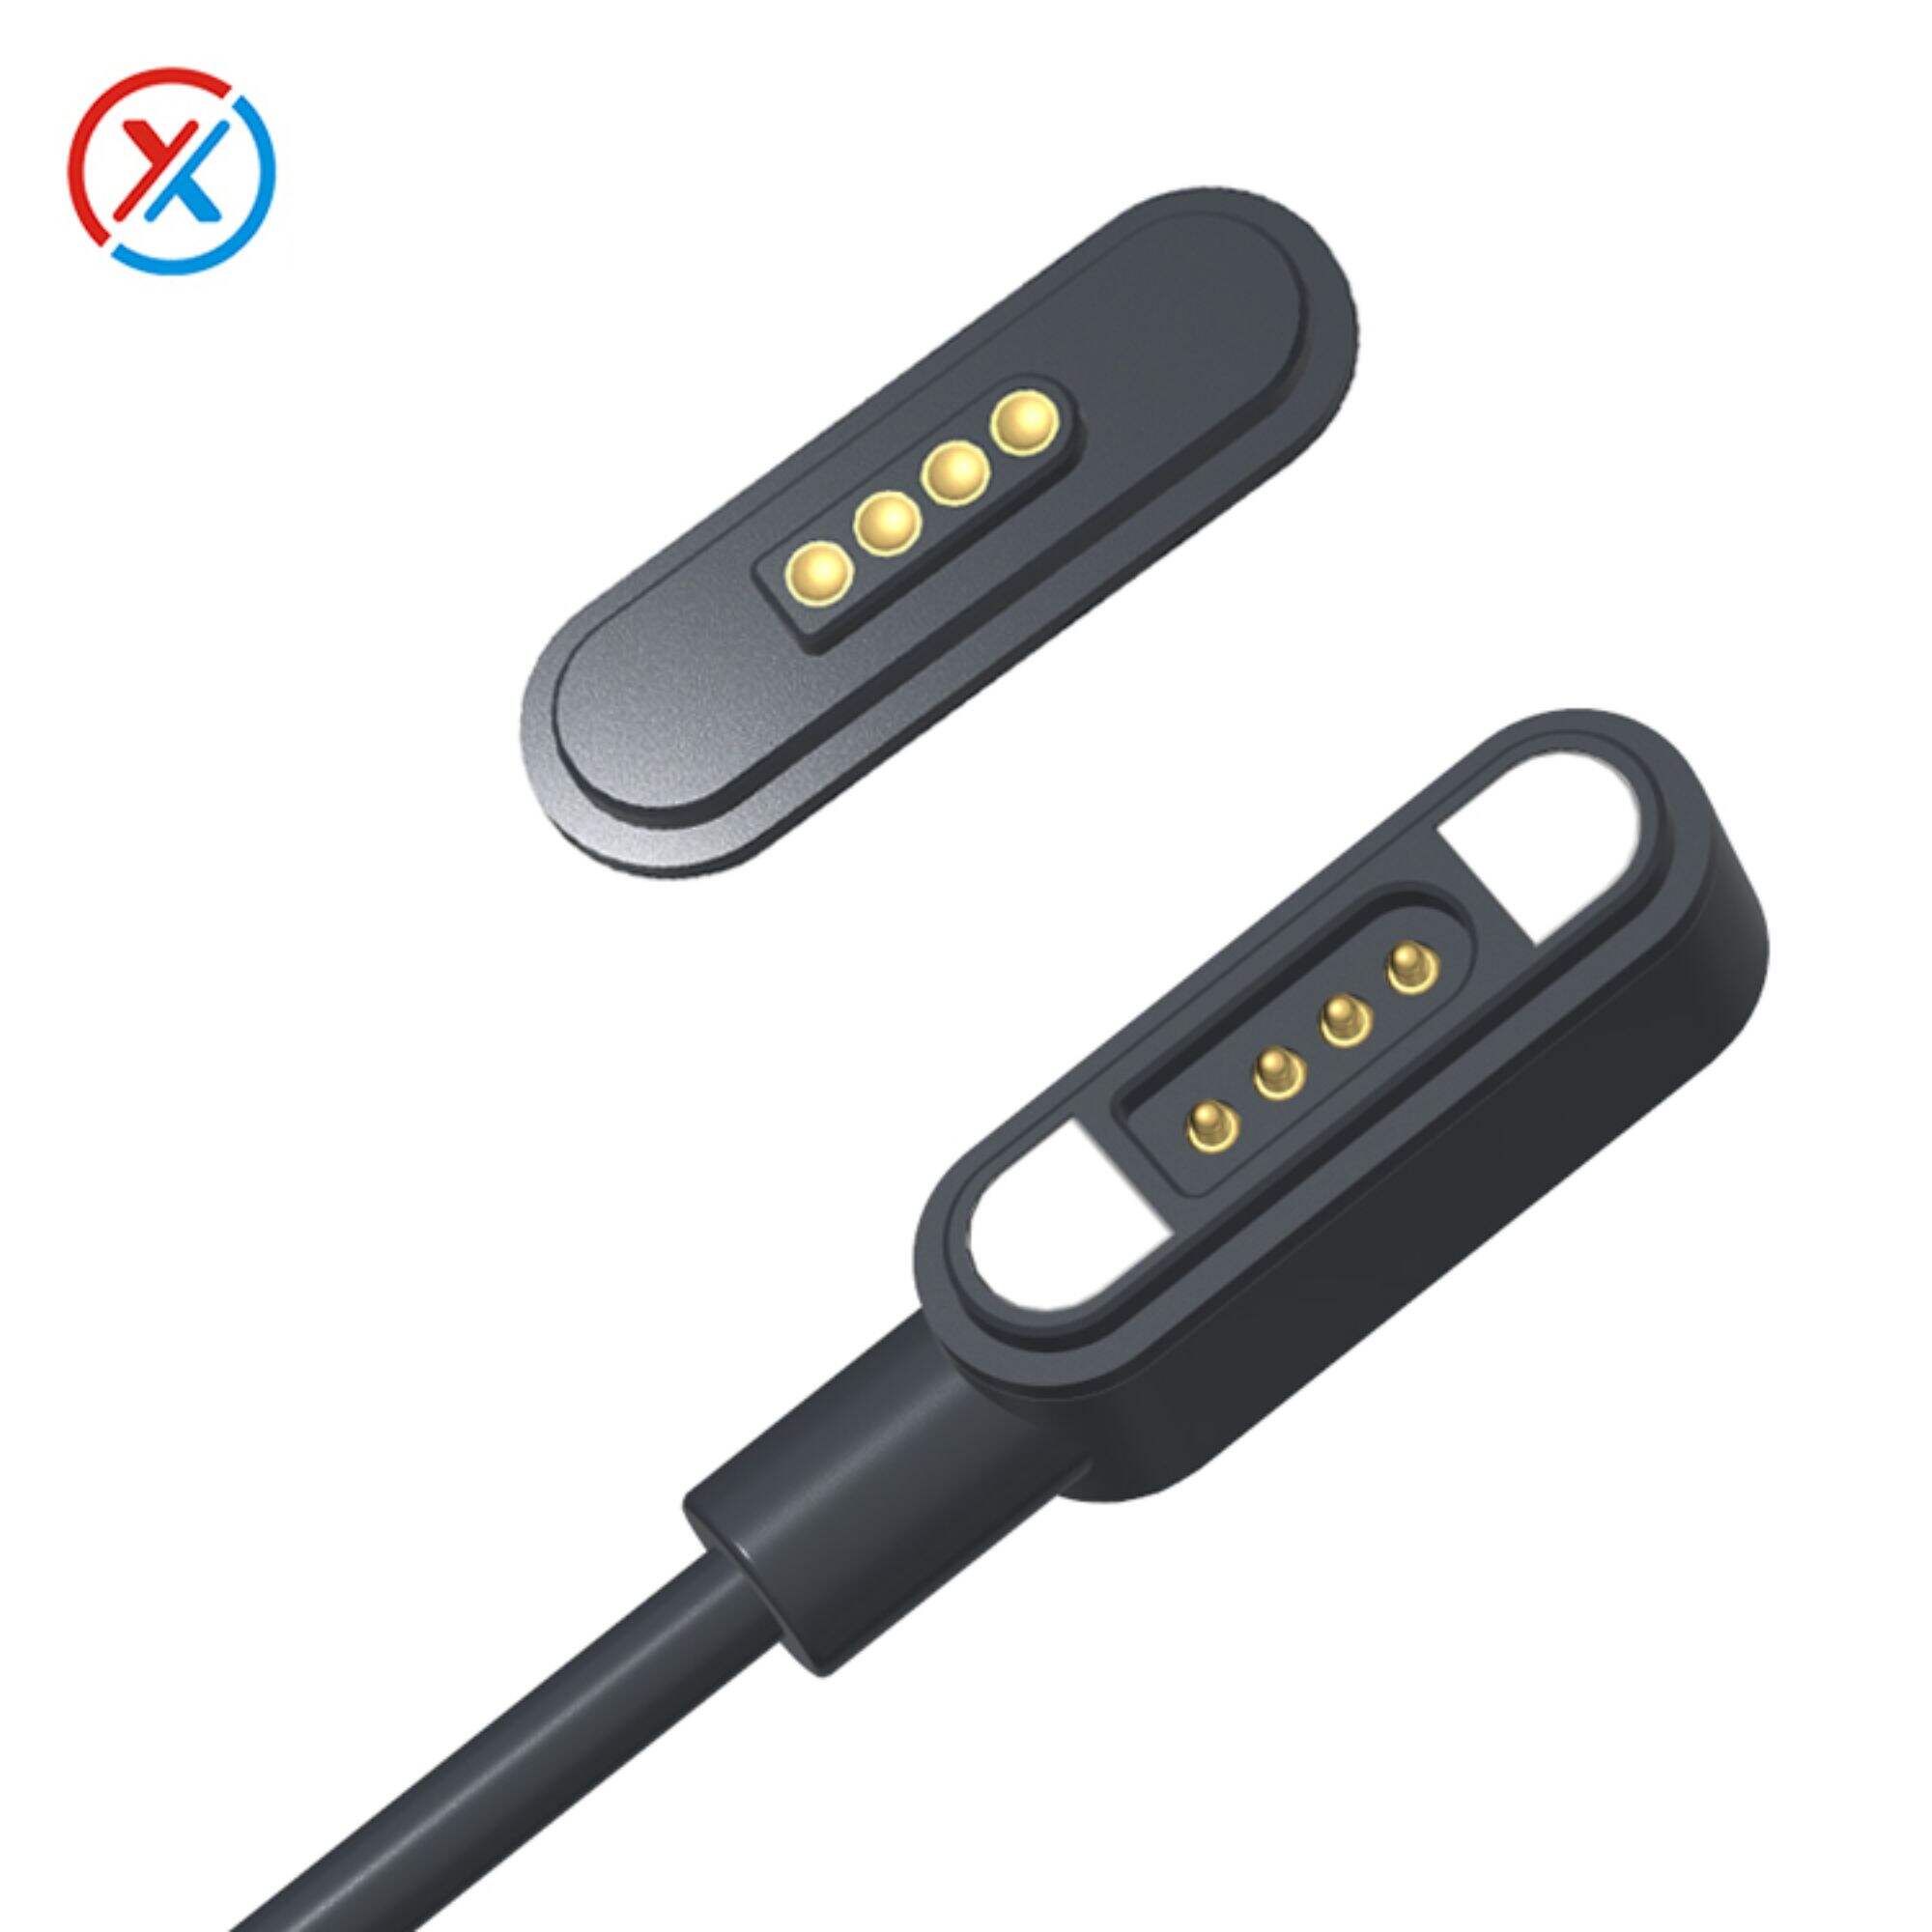 4-pin magnetic strip USB charger,is suitable for printer scanner data line male and female head